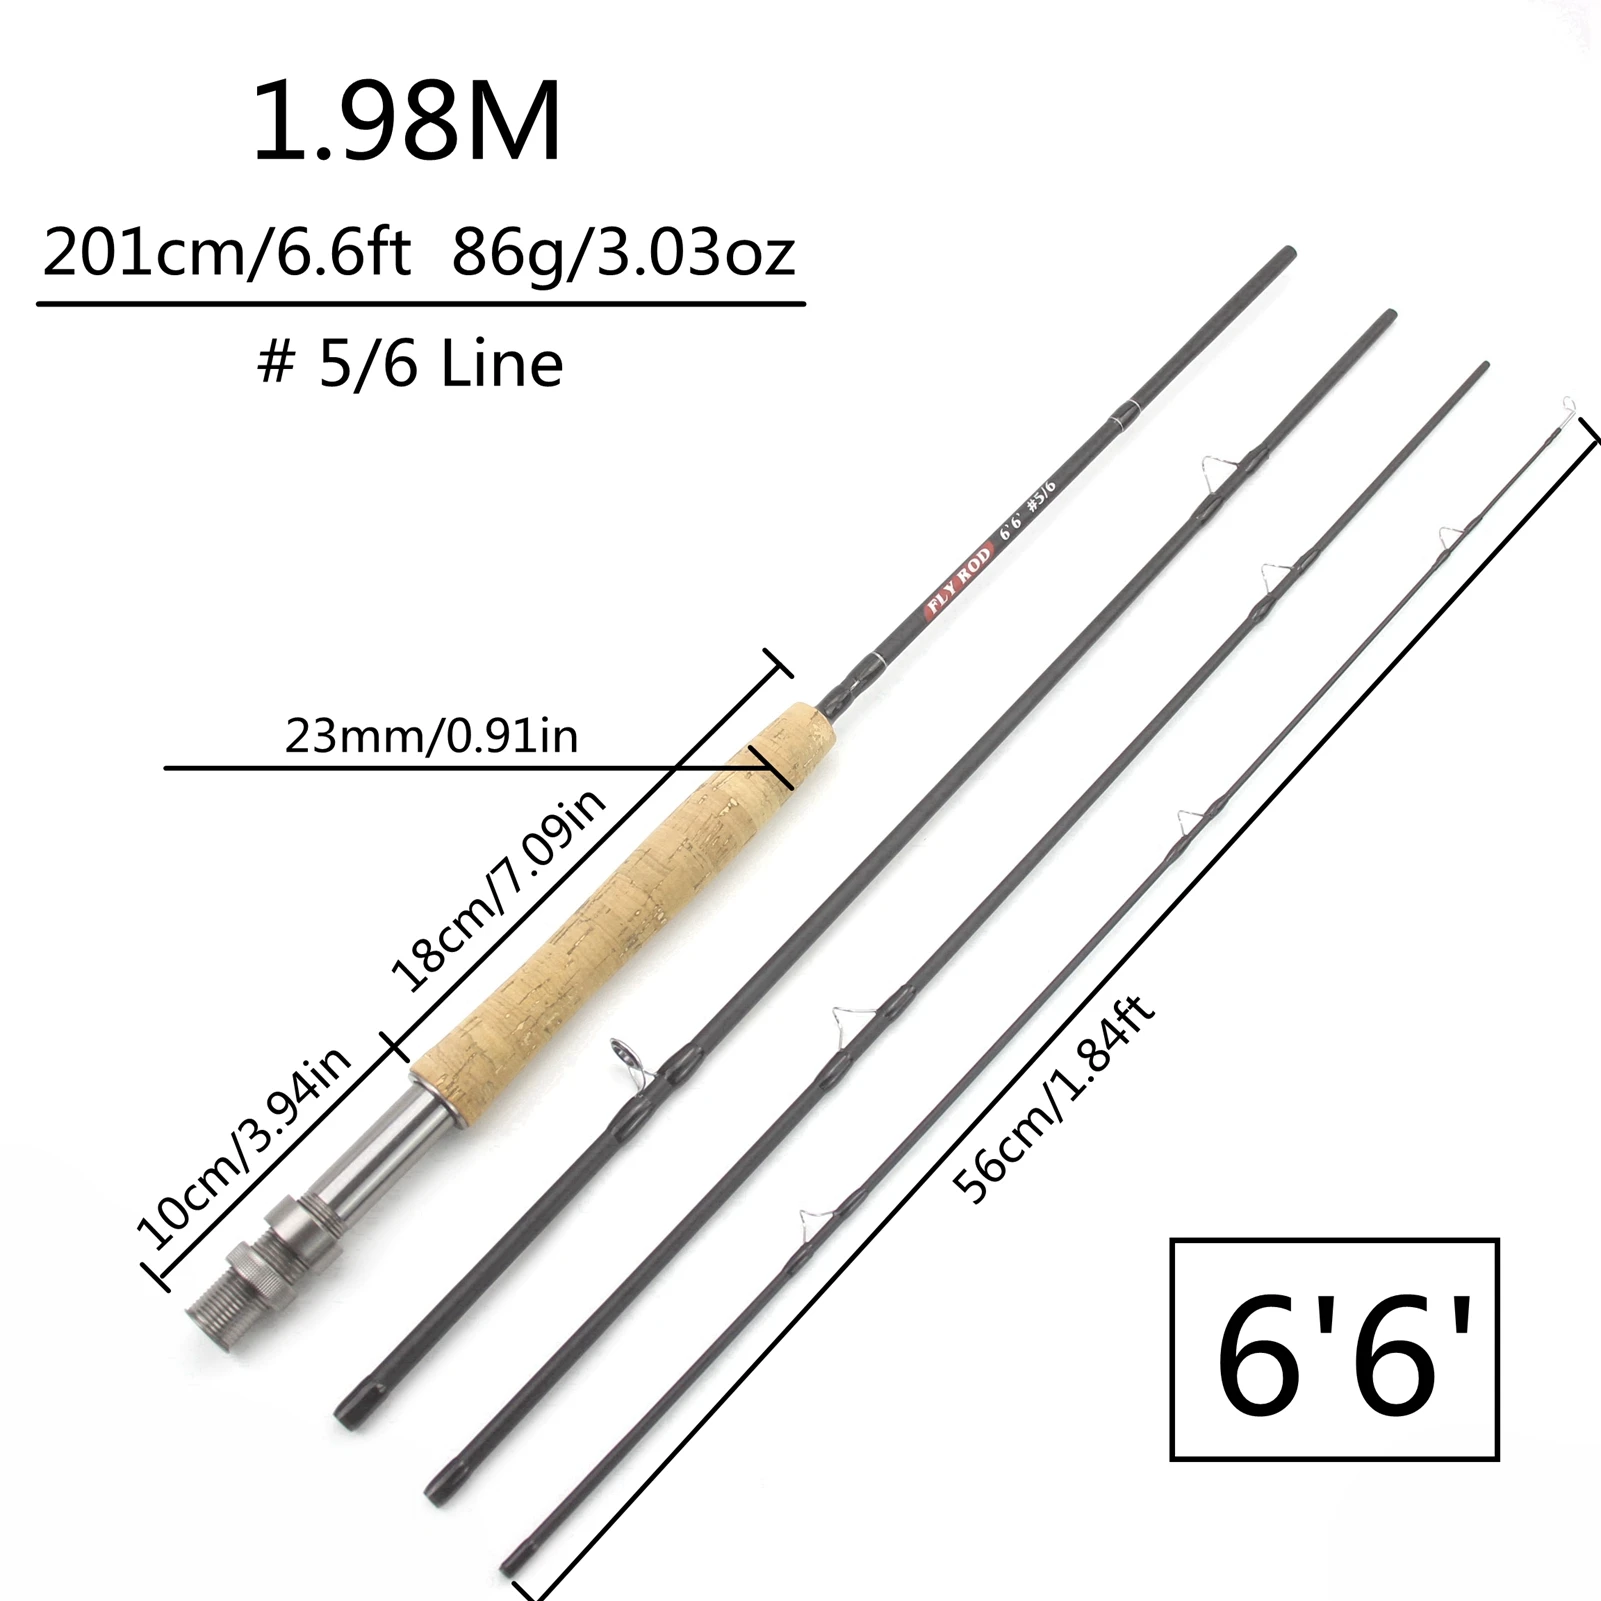 NEW 2.1M 7FT Fly Fishing Rod King Fisher Carbon Fiber Ultralight Weight Fly  Fishing Rod Lake River Fly Rod Goods for fishing